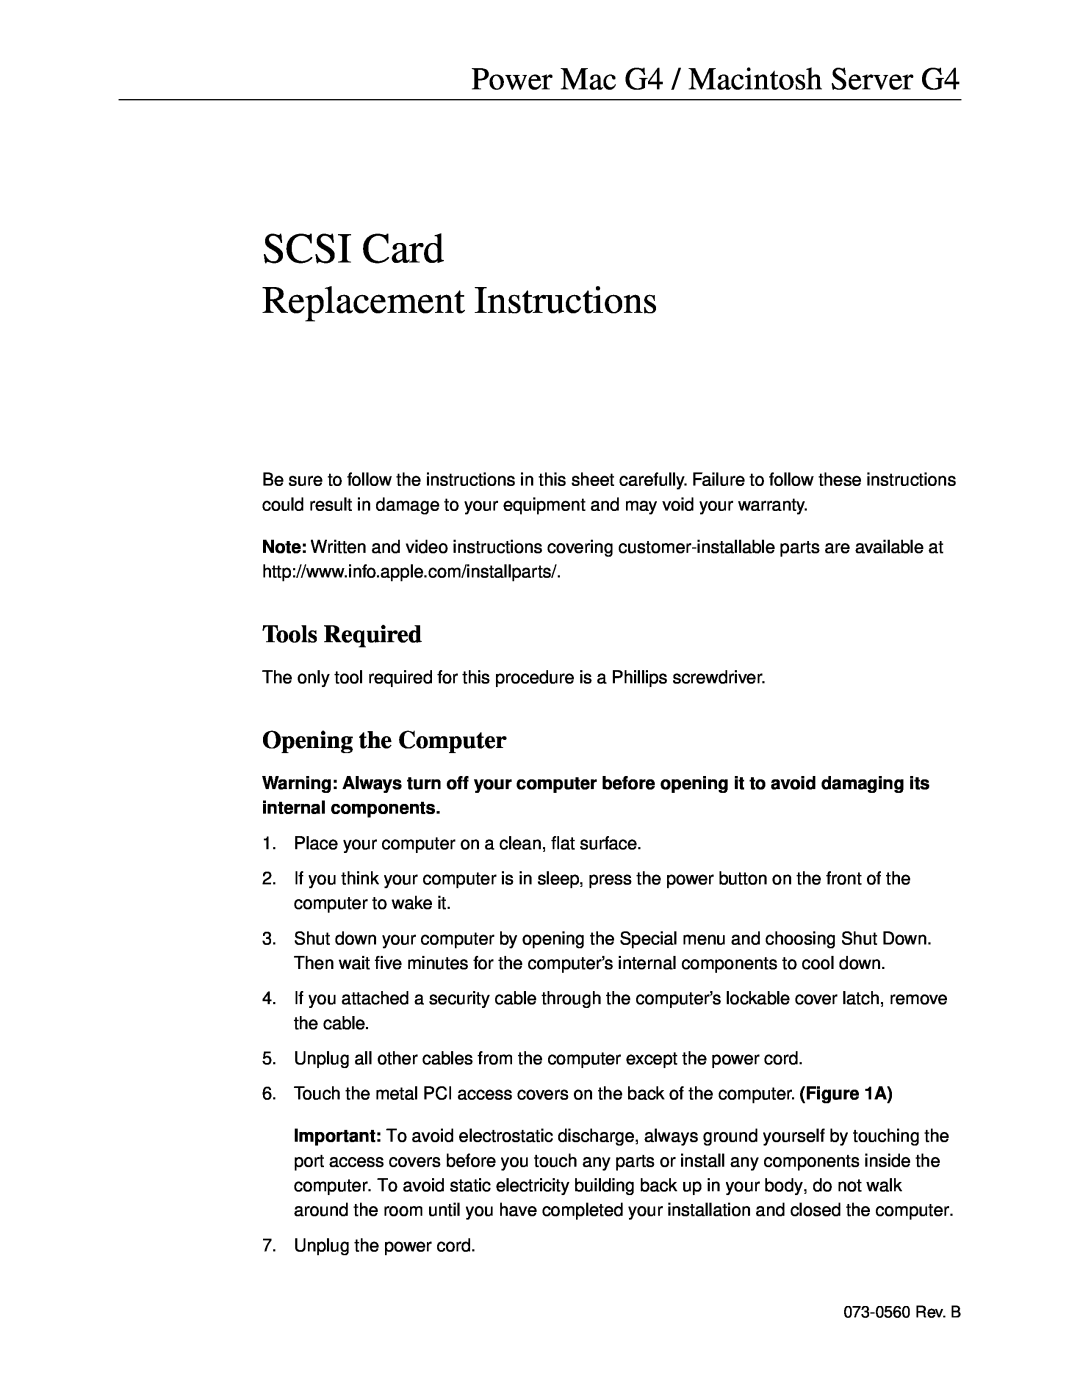 Apple SCSI Card warranty Tools Required, Opening the Computer, Replacement Instructions 